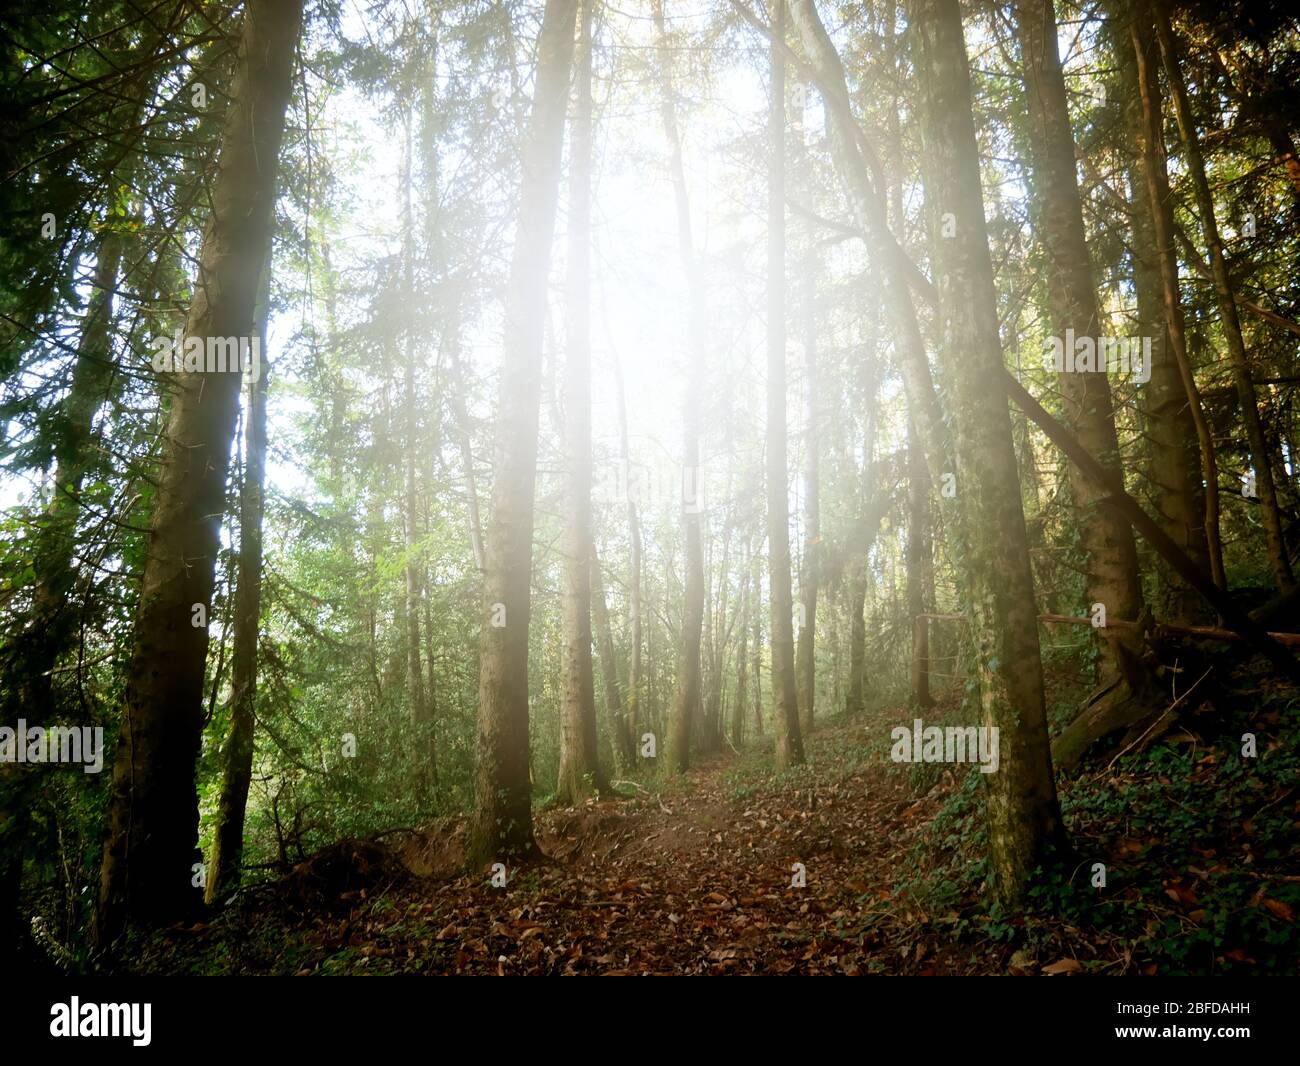 Enchanted forest crossed by the sun's rays Stock Photo